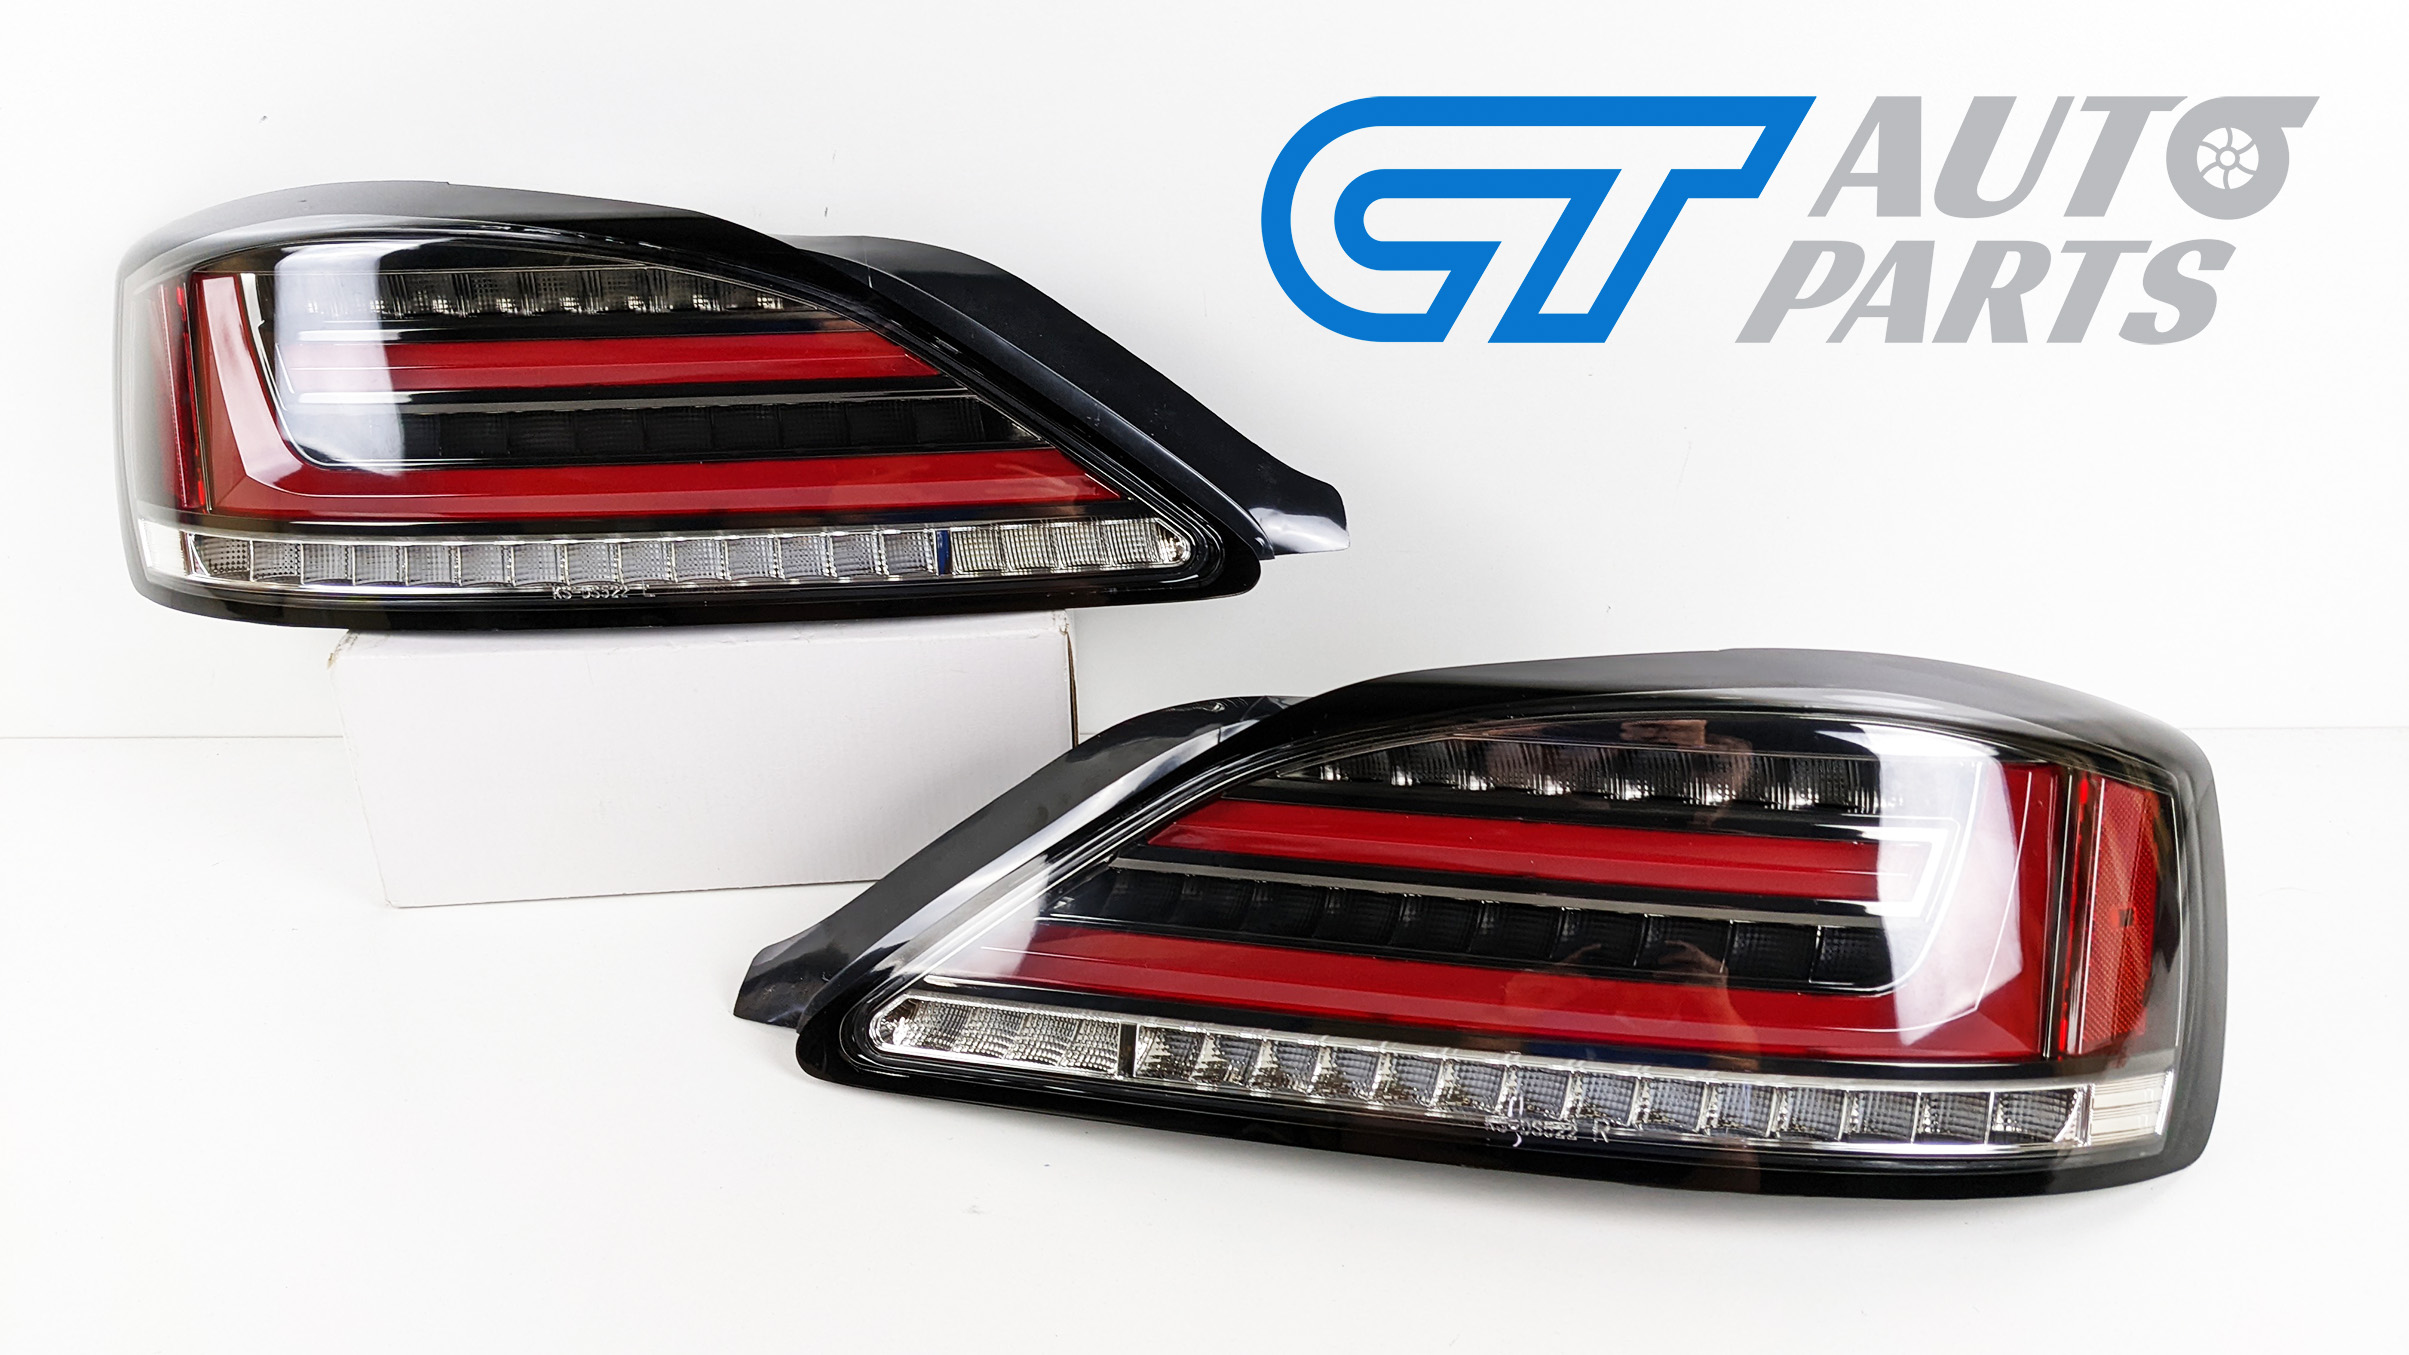 Playful type Quagmire 78 Works Black Fiber LED Taillights for 99-02 Nissan Silvia 200SX S15 Spec  R tail lights - CT AutoParts